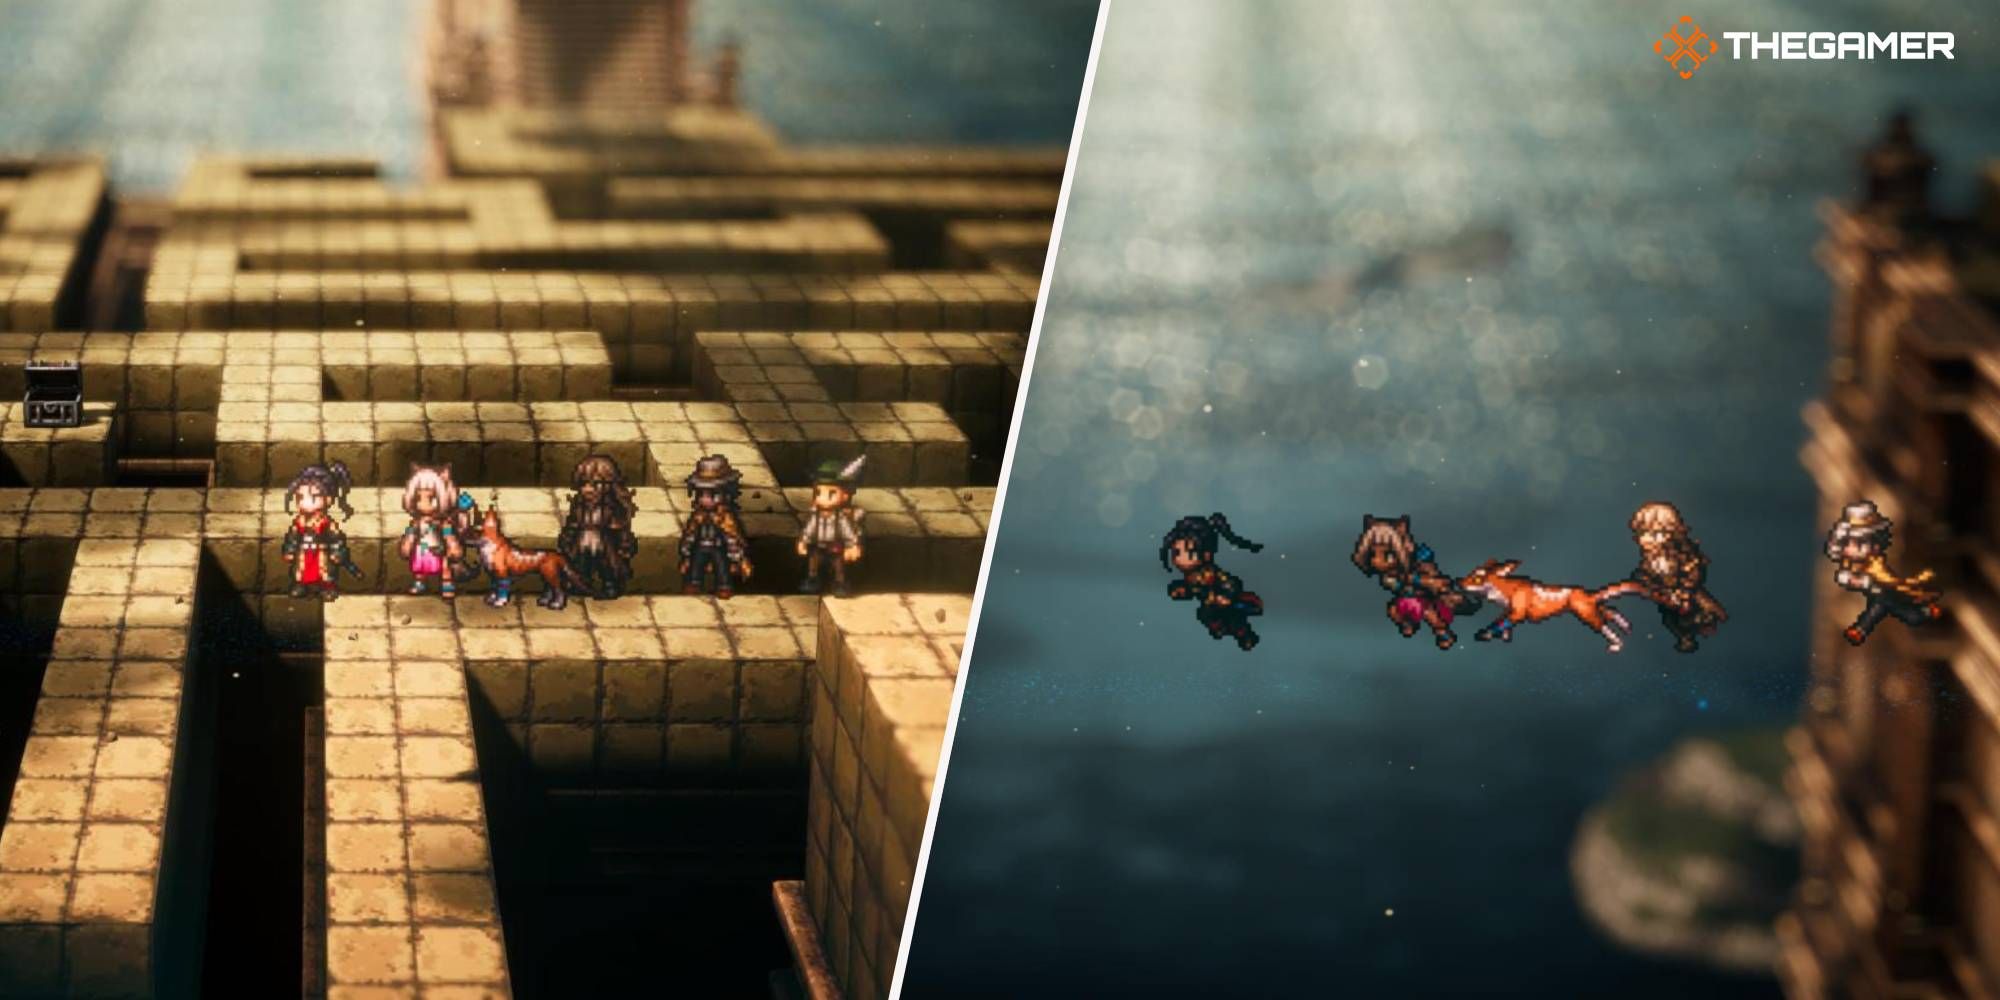 Octopath Traveler 2: How To Unlock All Secondary Job Licenses